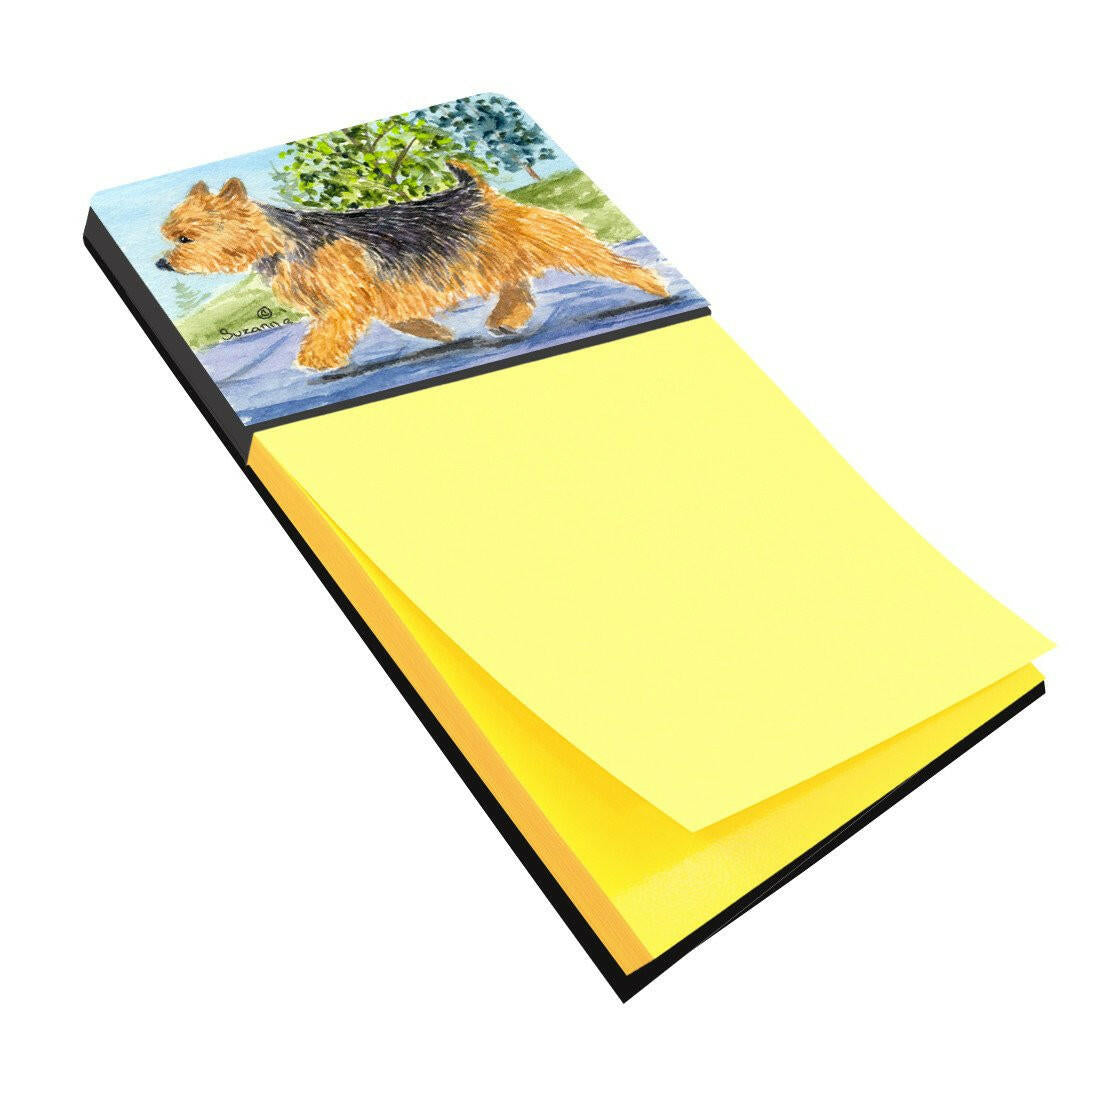 Norwich Terrier Refiillable Sticky Note Holder or Postit Note Dispenser SS8879SN by Caroline's Treasures